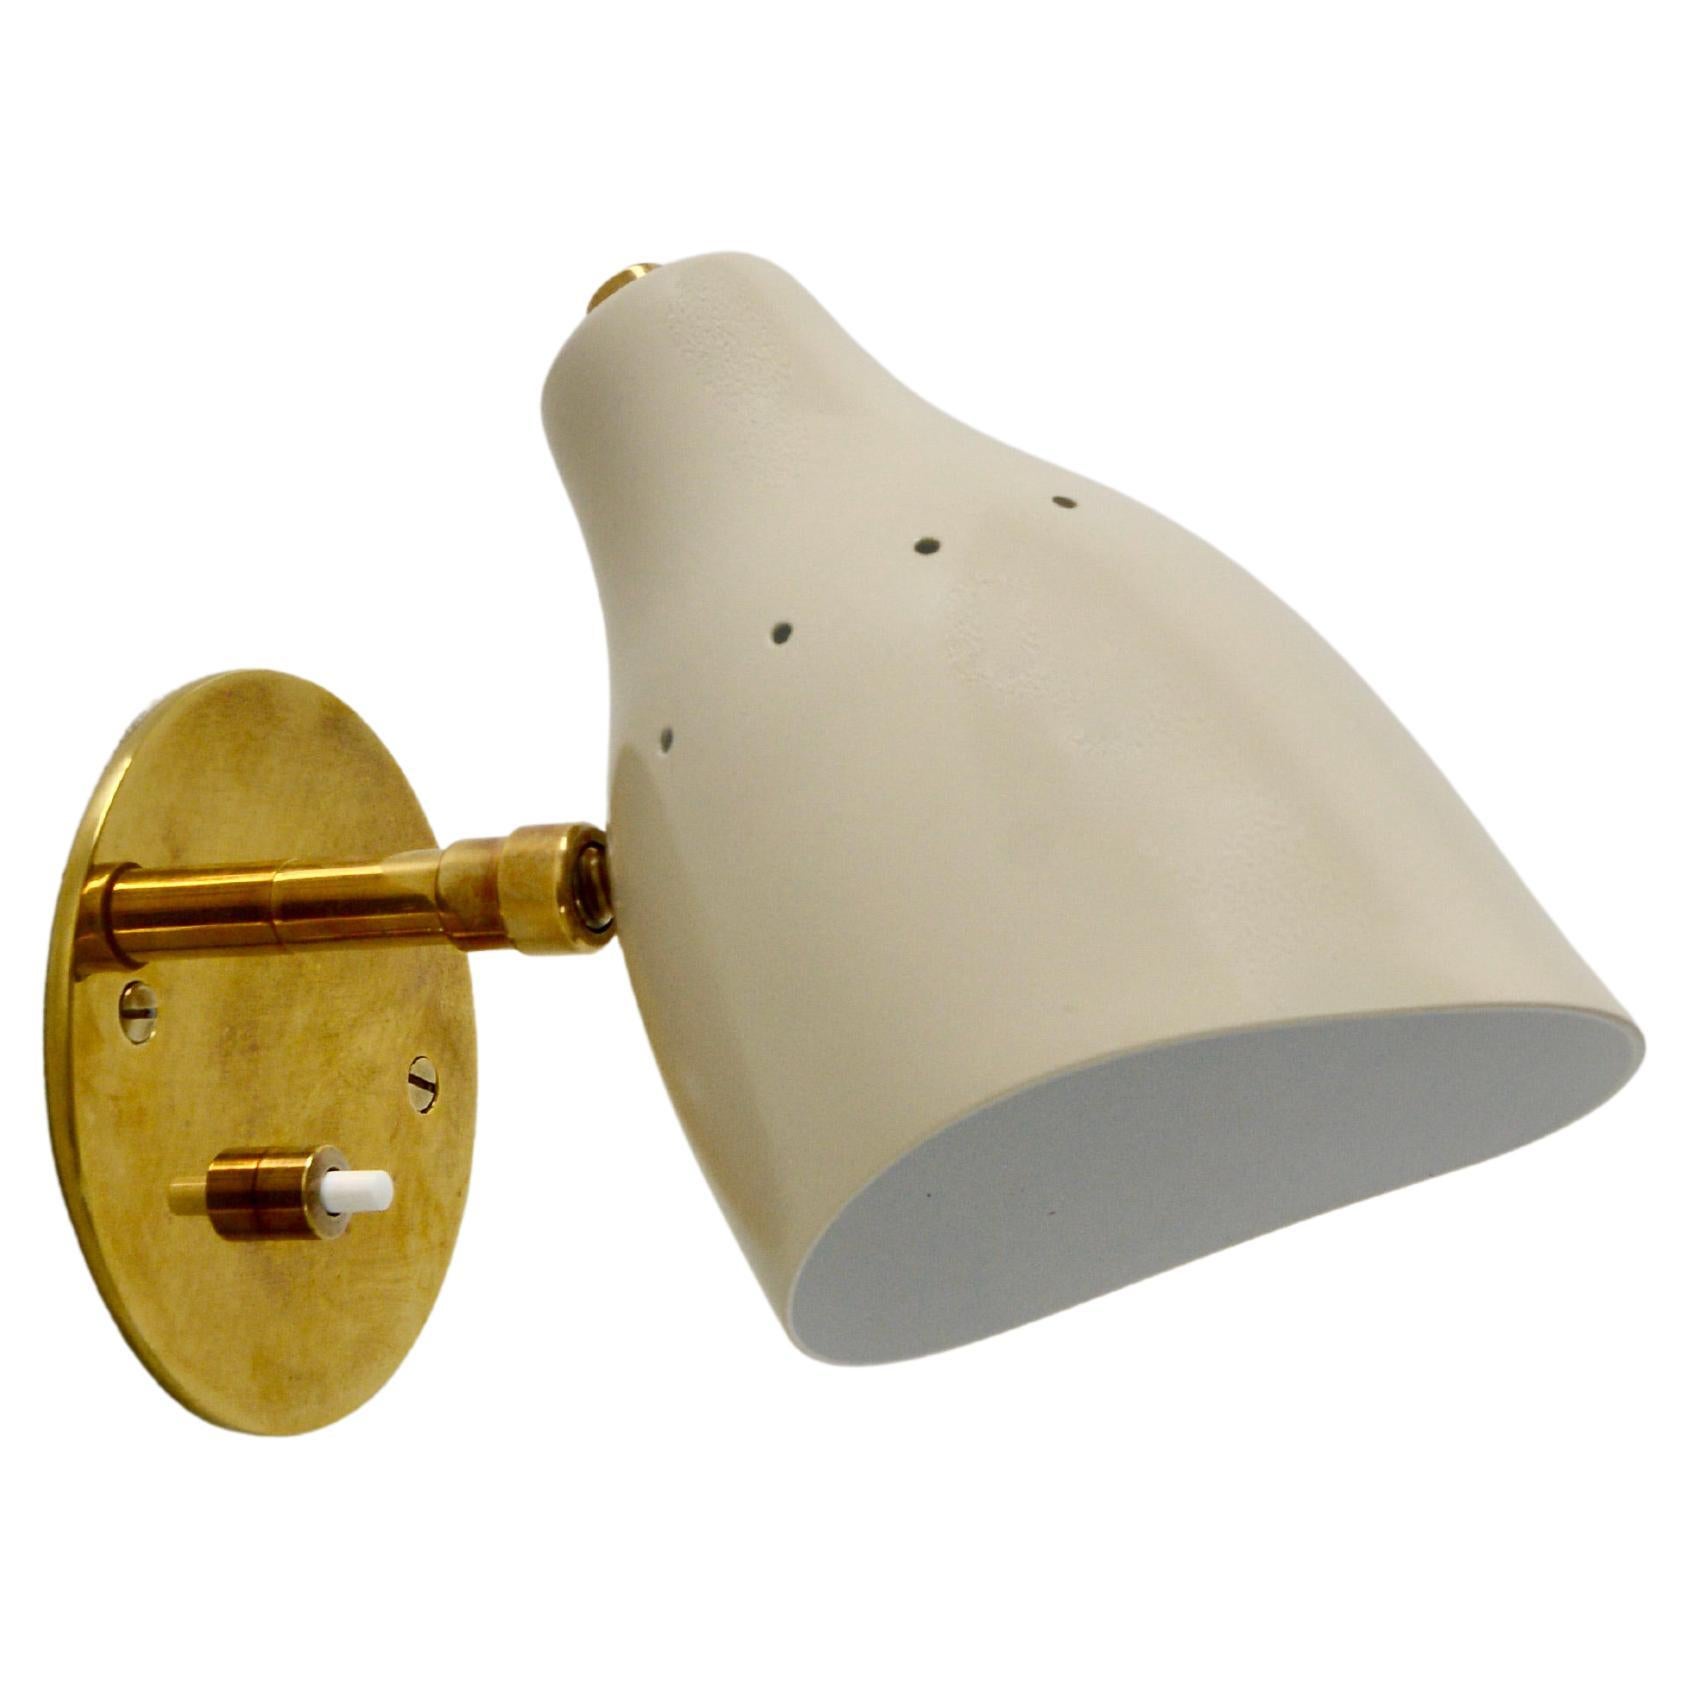 Beautiful Lumfardo LUread spot sconce with a push switch on the backplate. A sconce inspired as a contemporary take on classic midcentury lines. Can be wired for any region worldwide. Single E12 candelabra based socket. Light bulbs supplied.